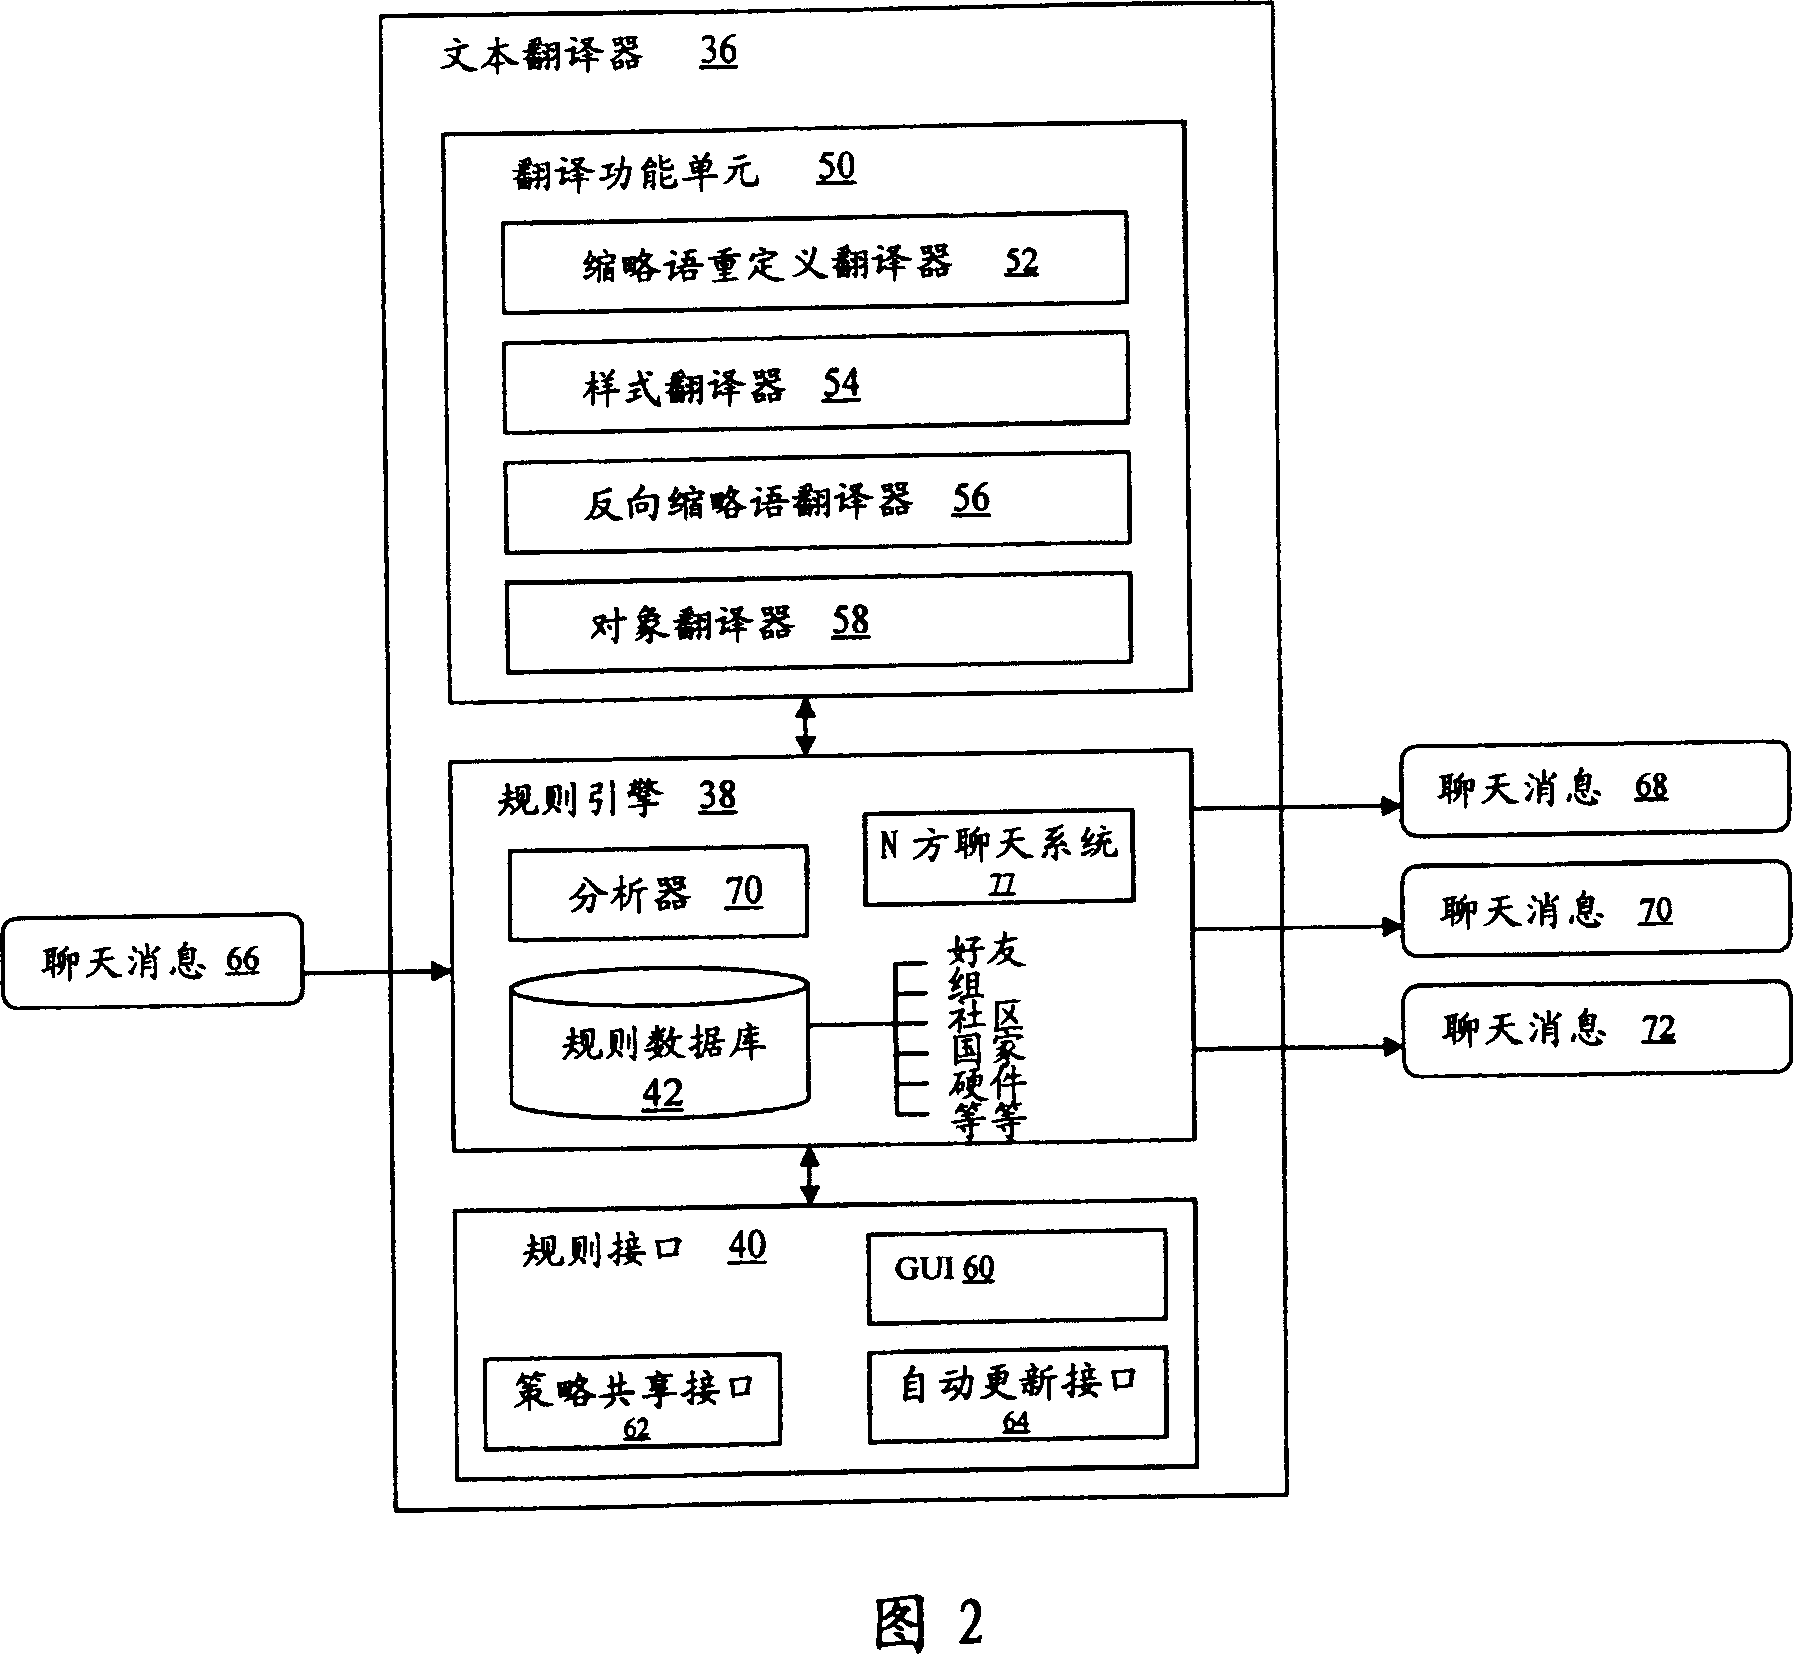 System and method for defining and translating chat abbreviations